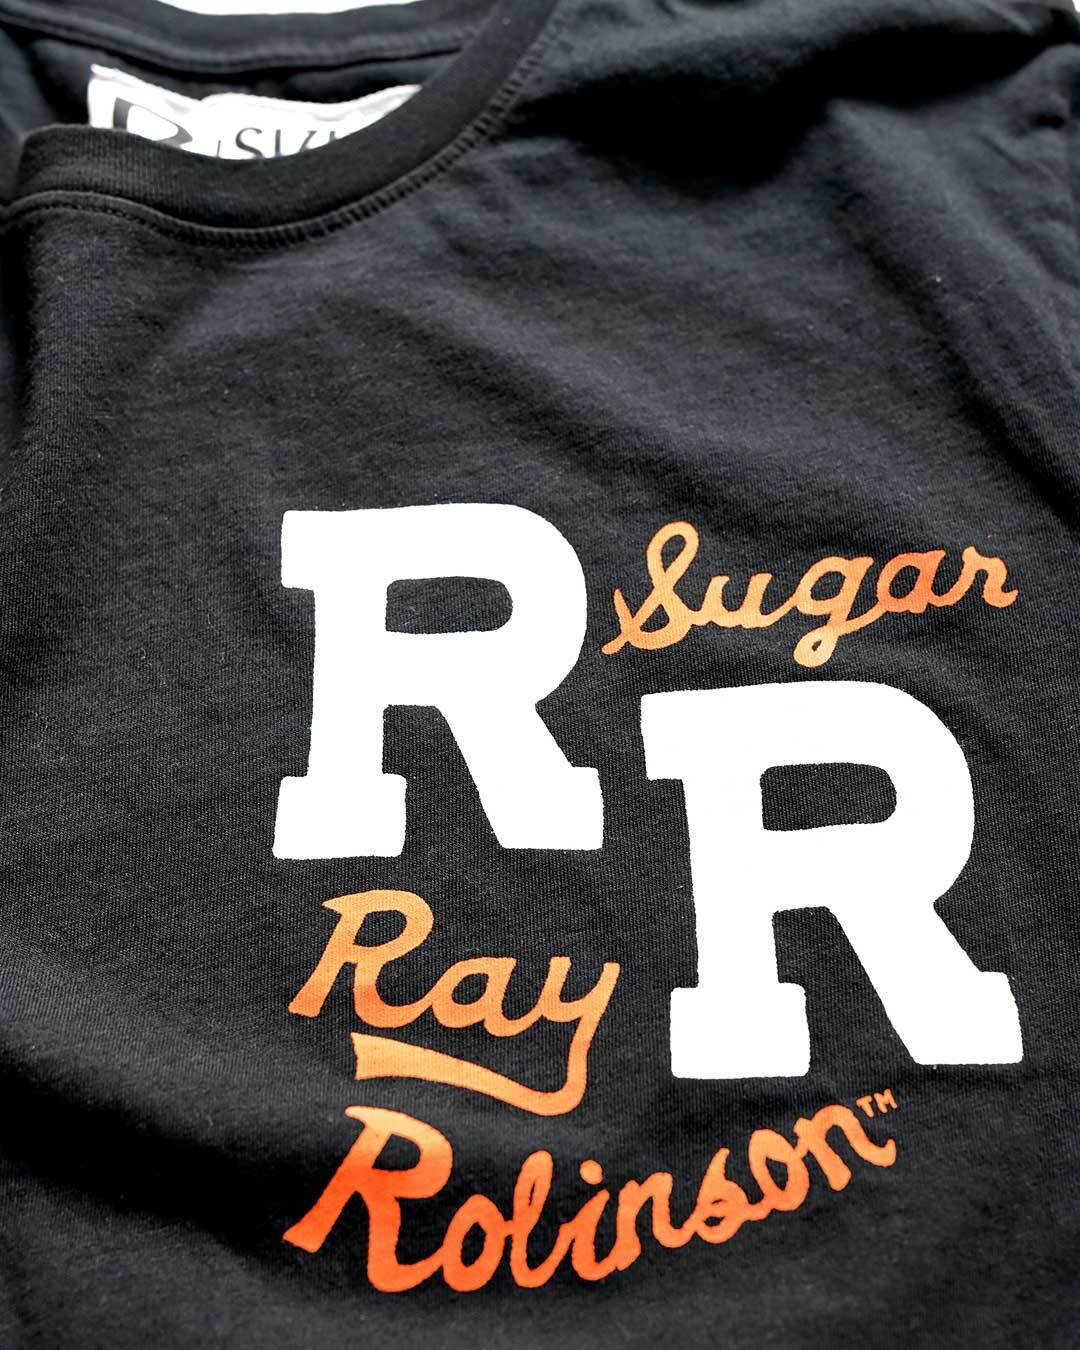 Sugar Ray Robinson Classic Black Tee - Roots of Fight